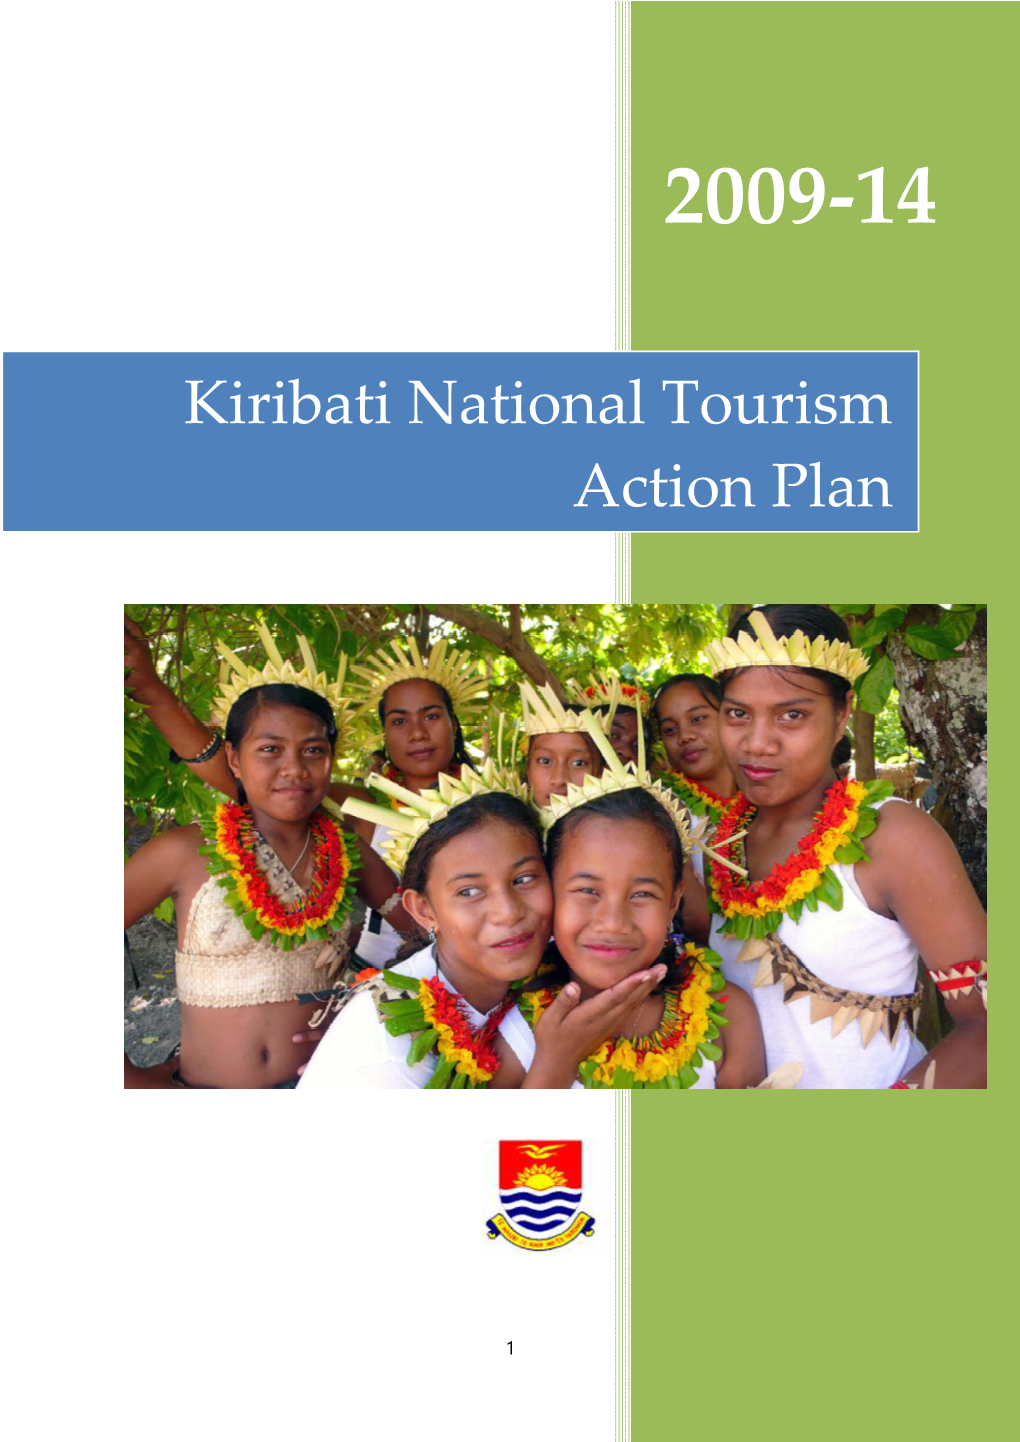 Kiribati National Tourism Action Plan – Be It Focussing on Infrastructure, Investment Or Management of Our Natural Assets